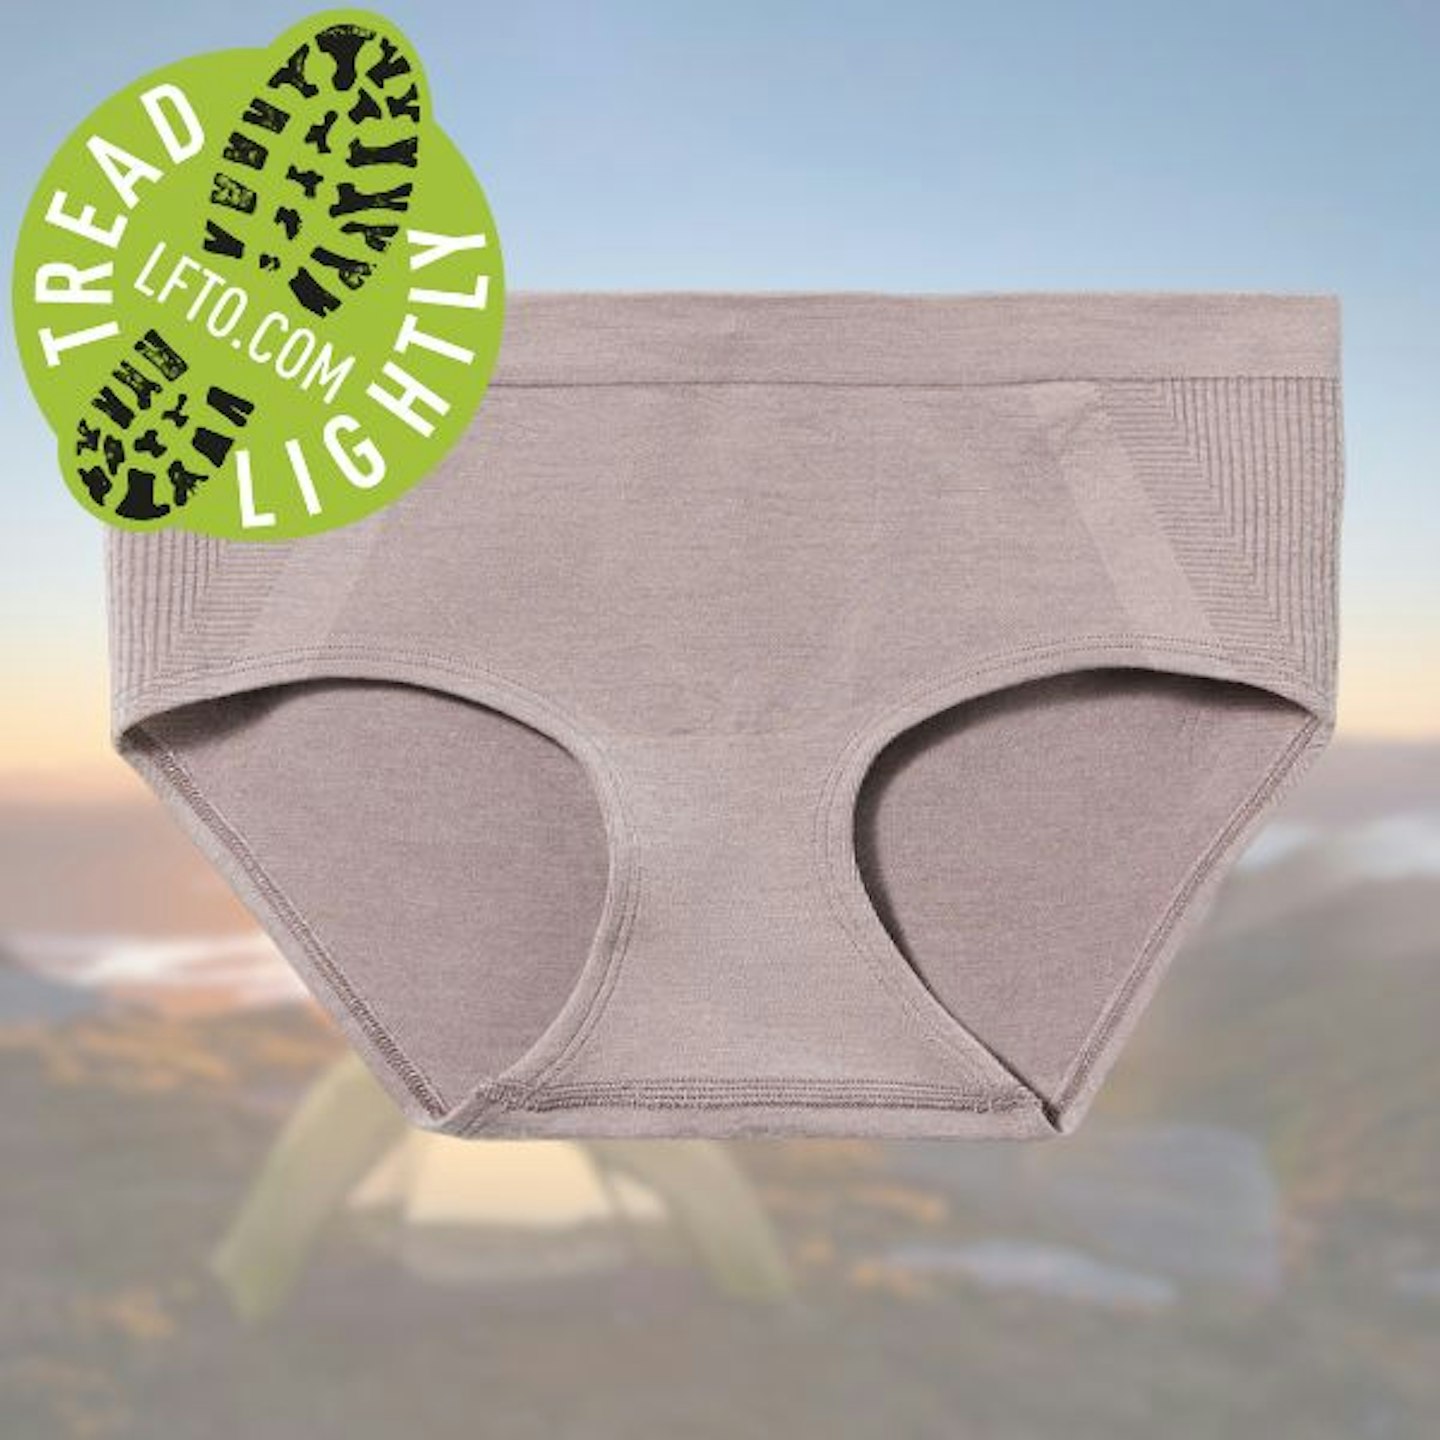 The Best Hiking and Workout Underwear (8 Top Brands Compared